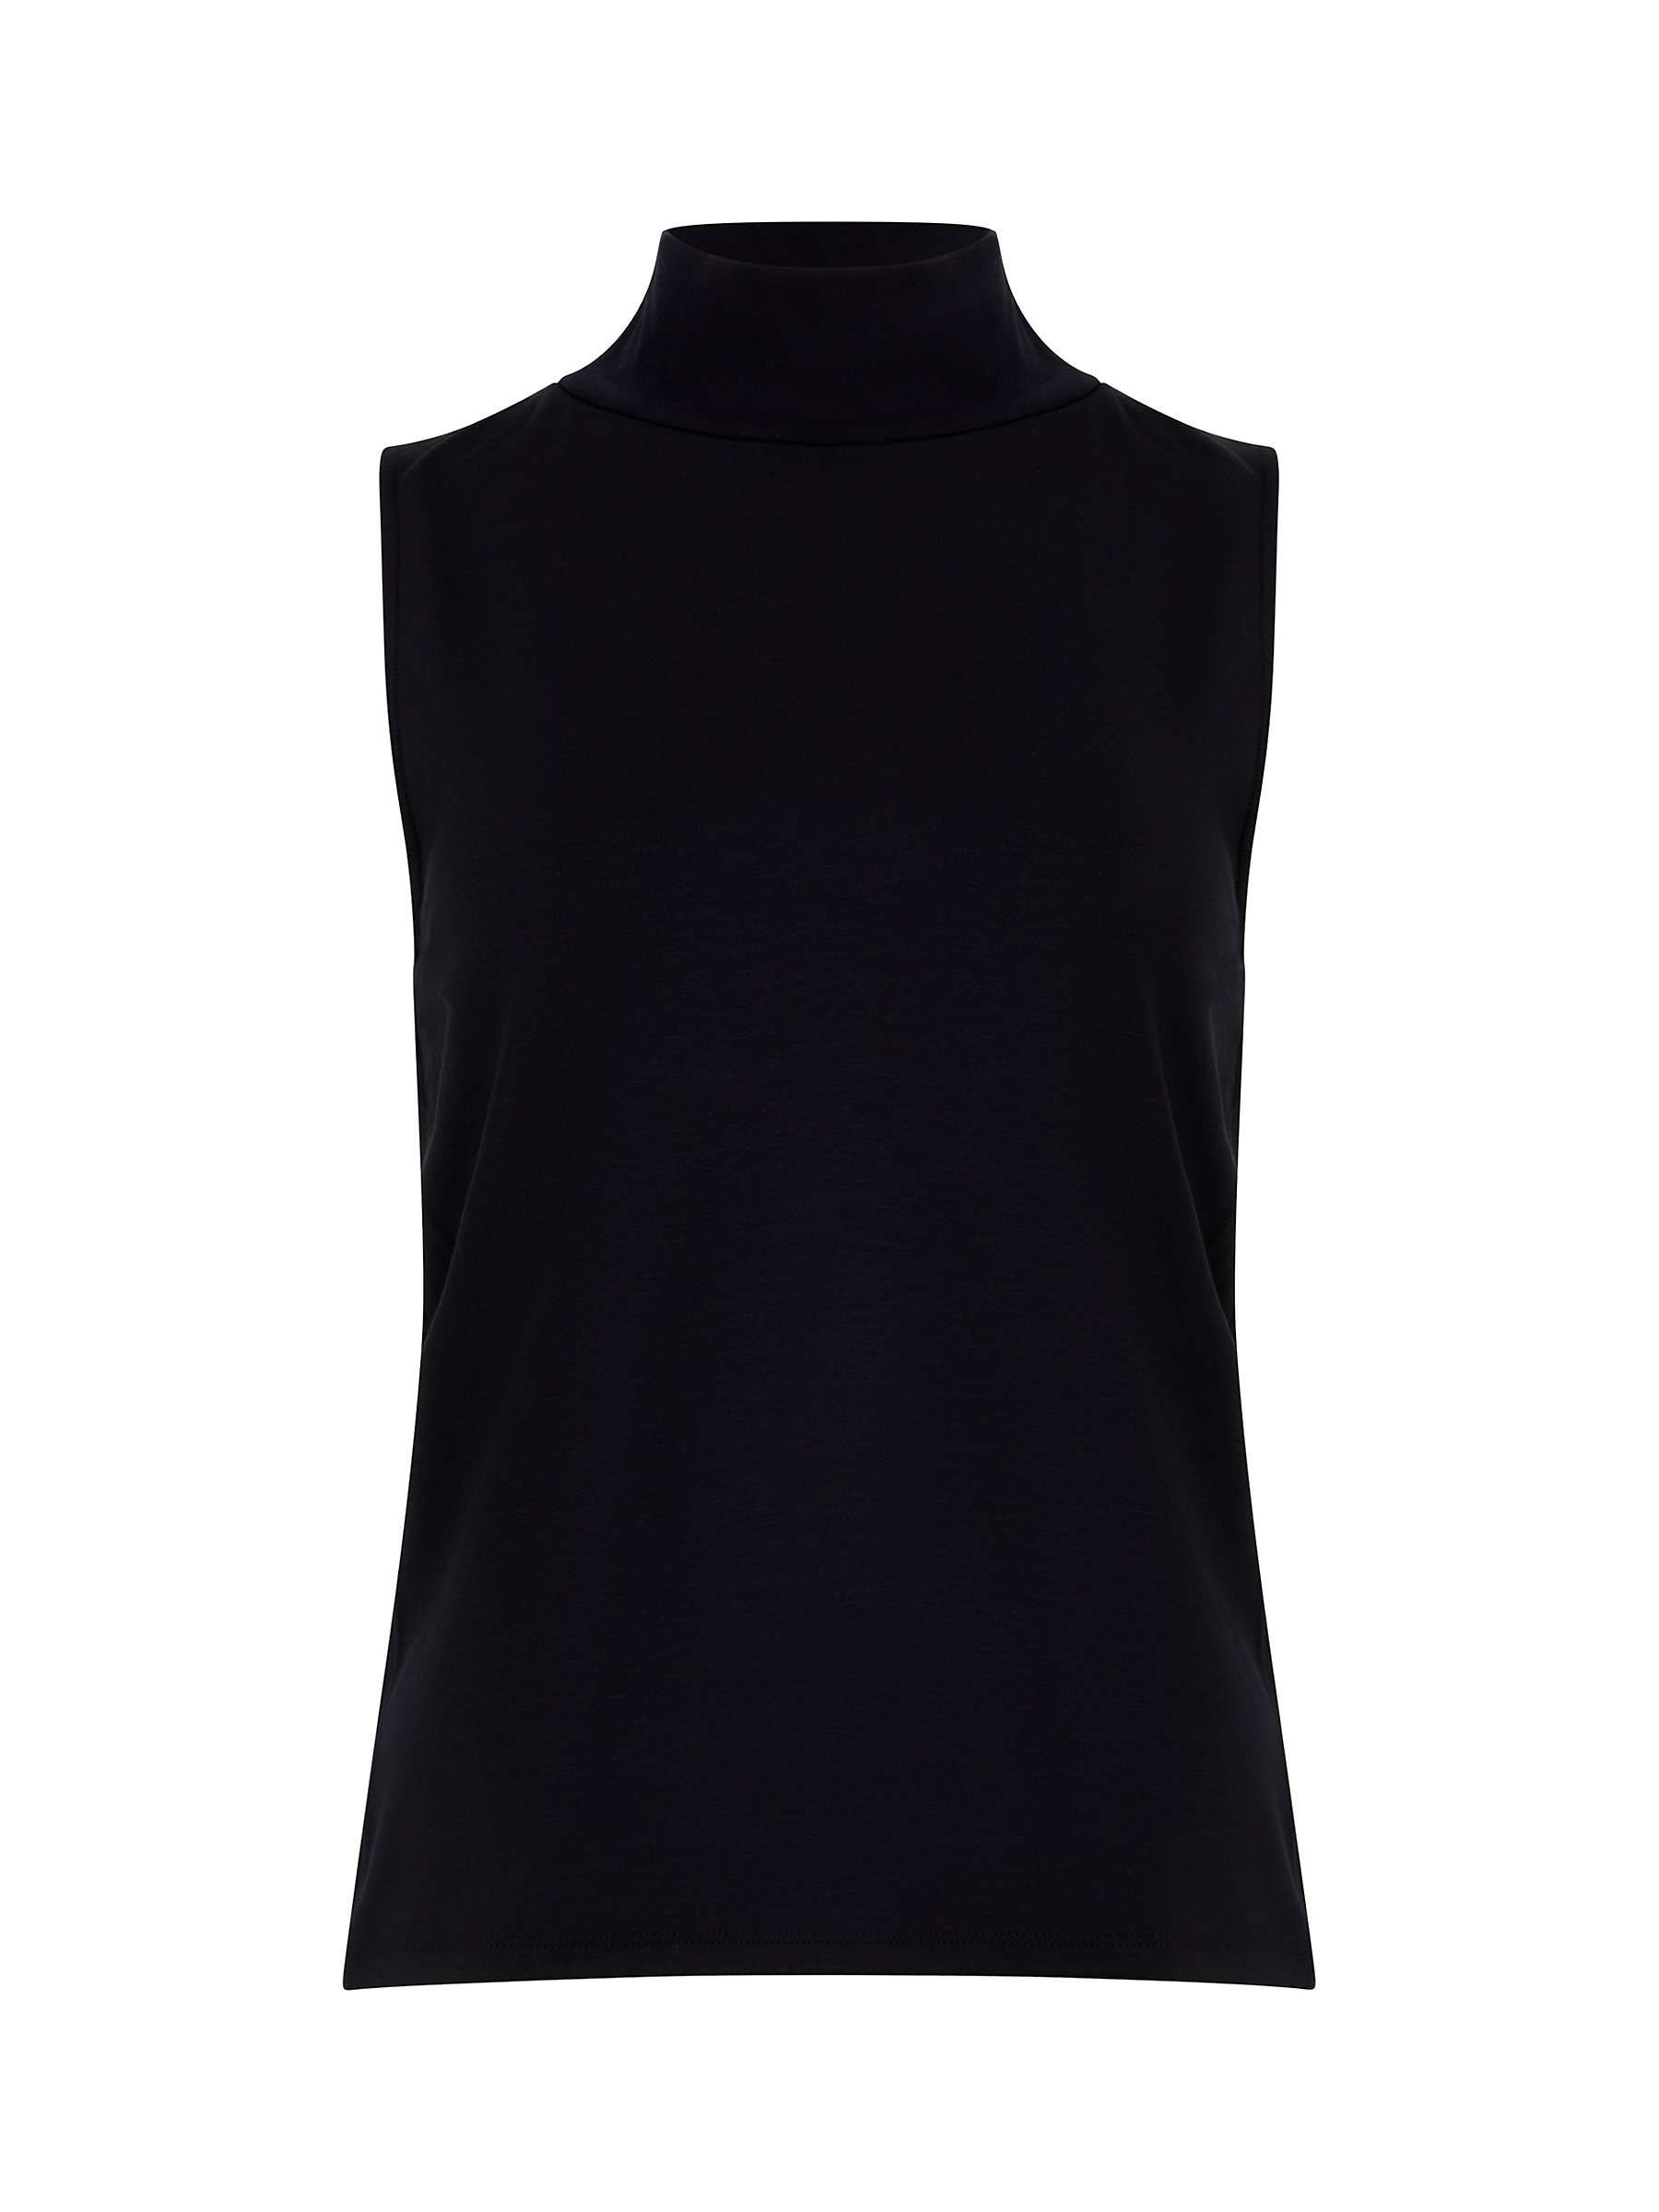 Buy French Connection Tash Roy Top, Blackout Online at johnlewis.com